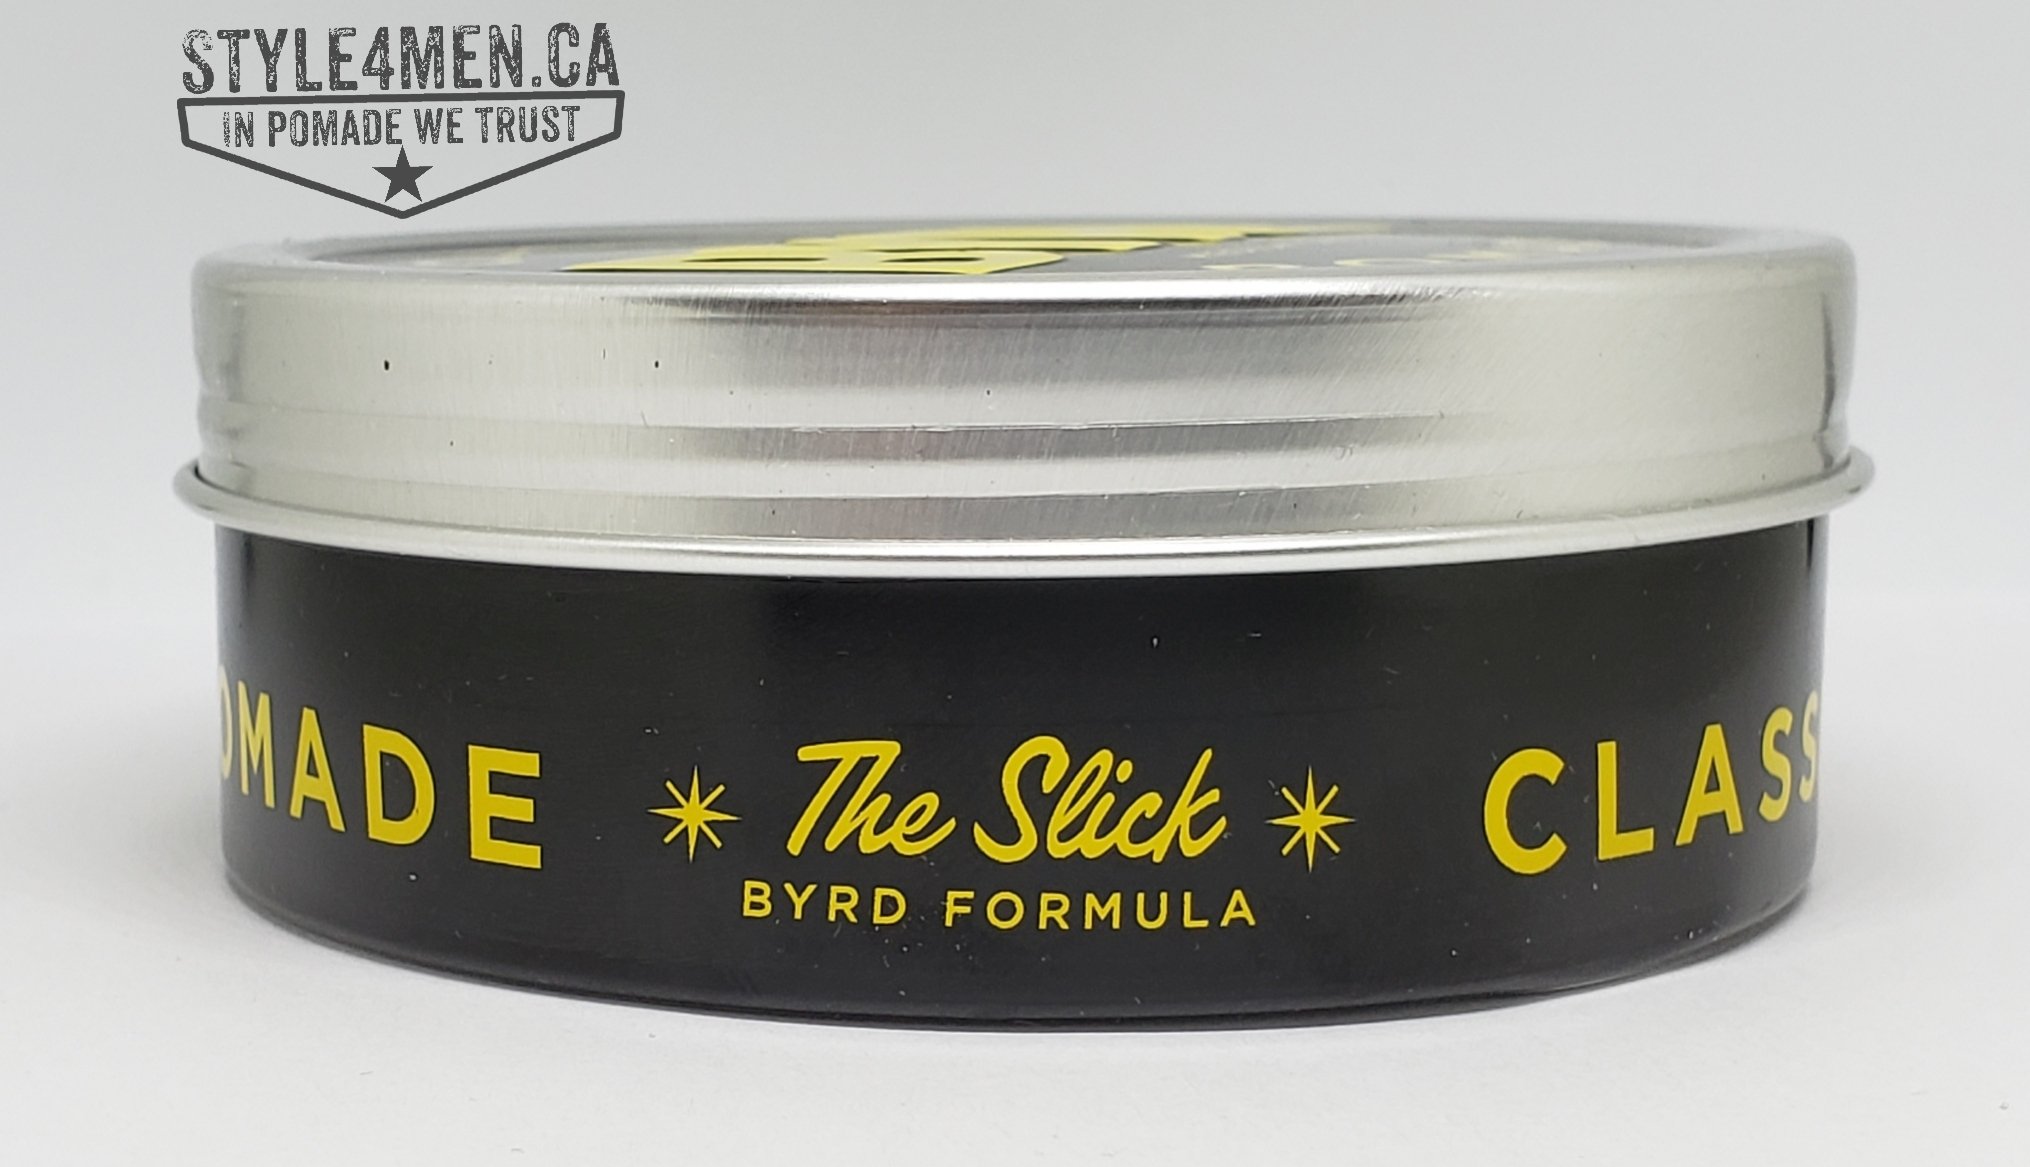 BYRD Classic Pomade